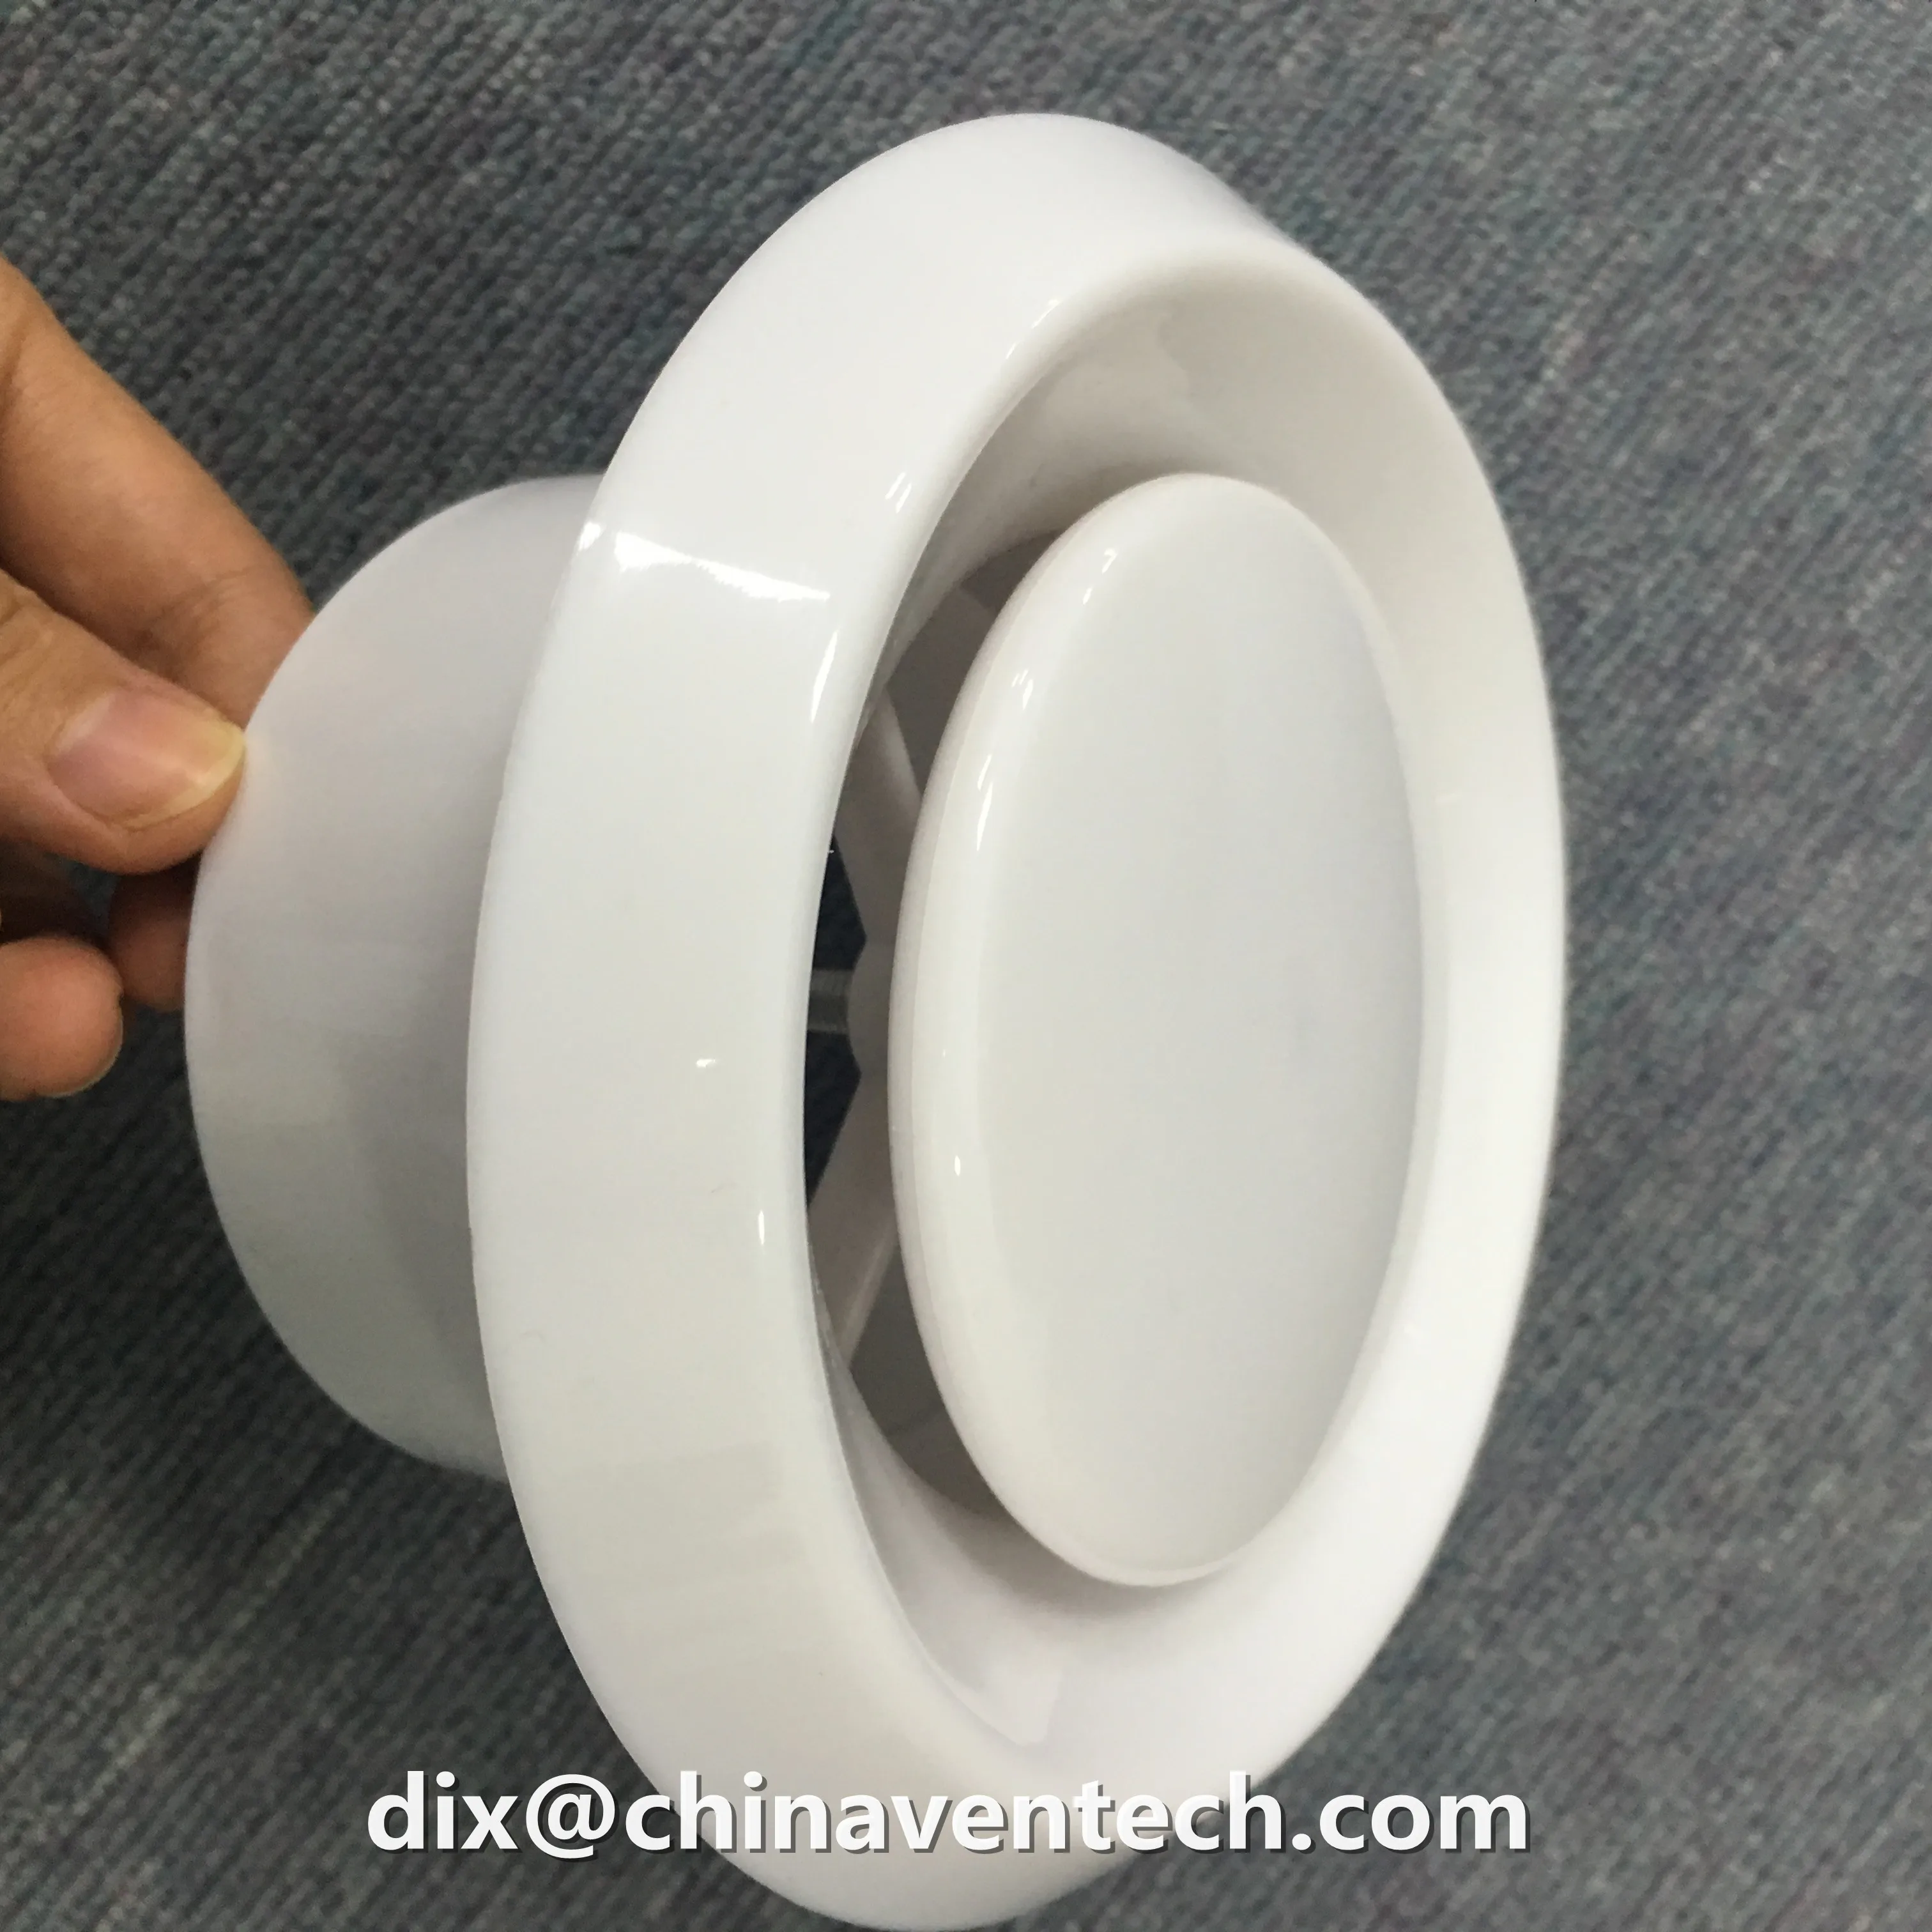 Supply and exhaust plastic air disc valves for ducting